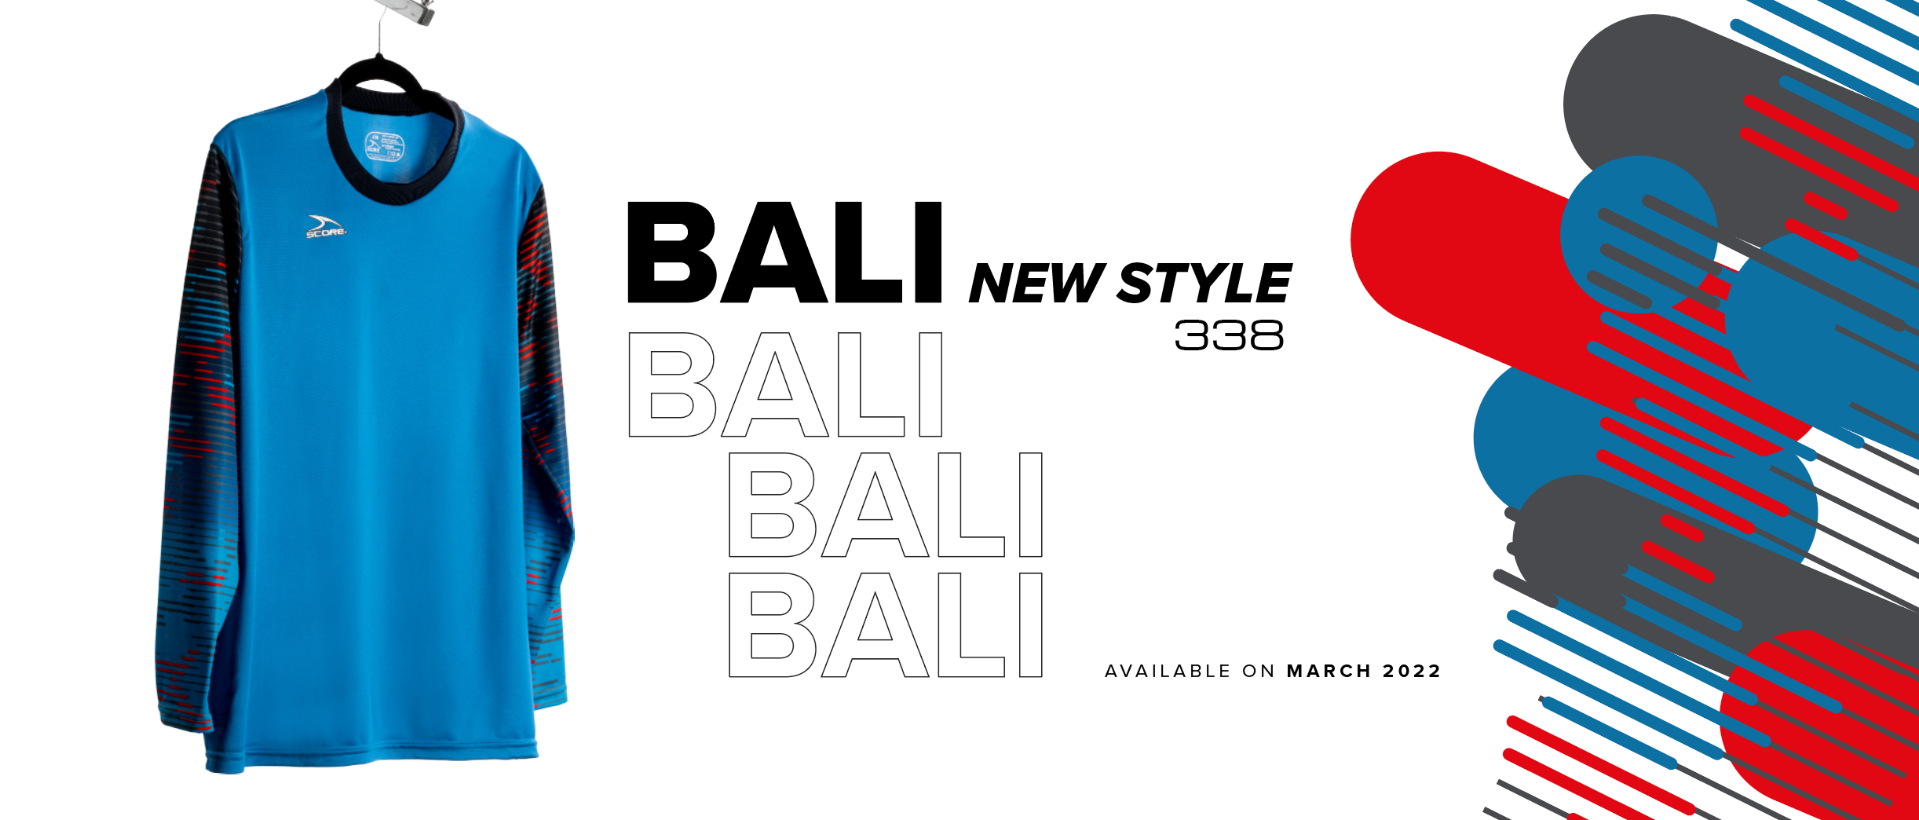 NEW BALI 338 - Available March 2022